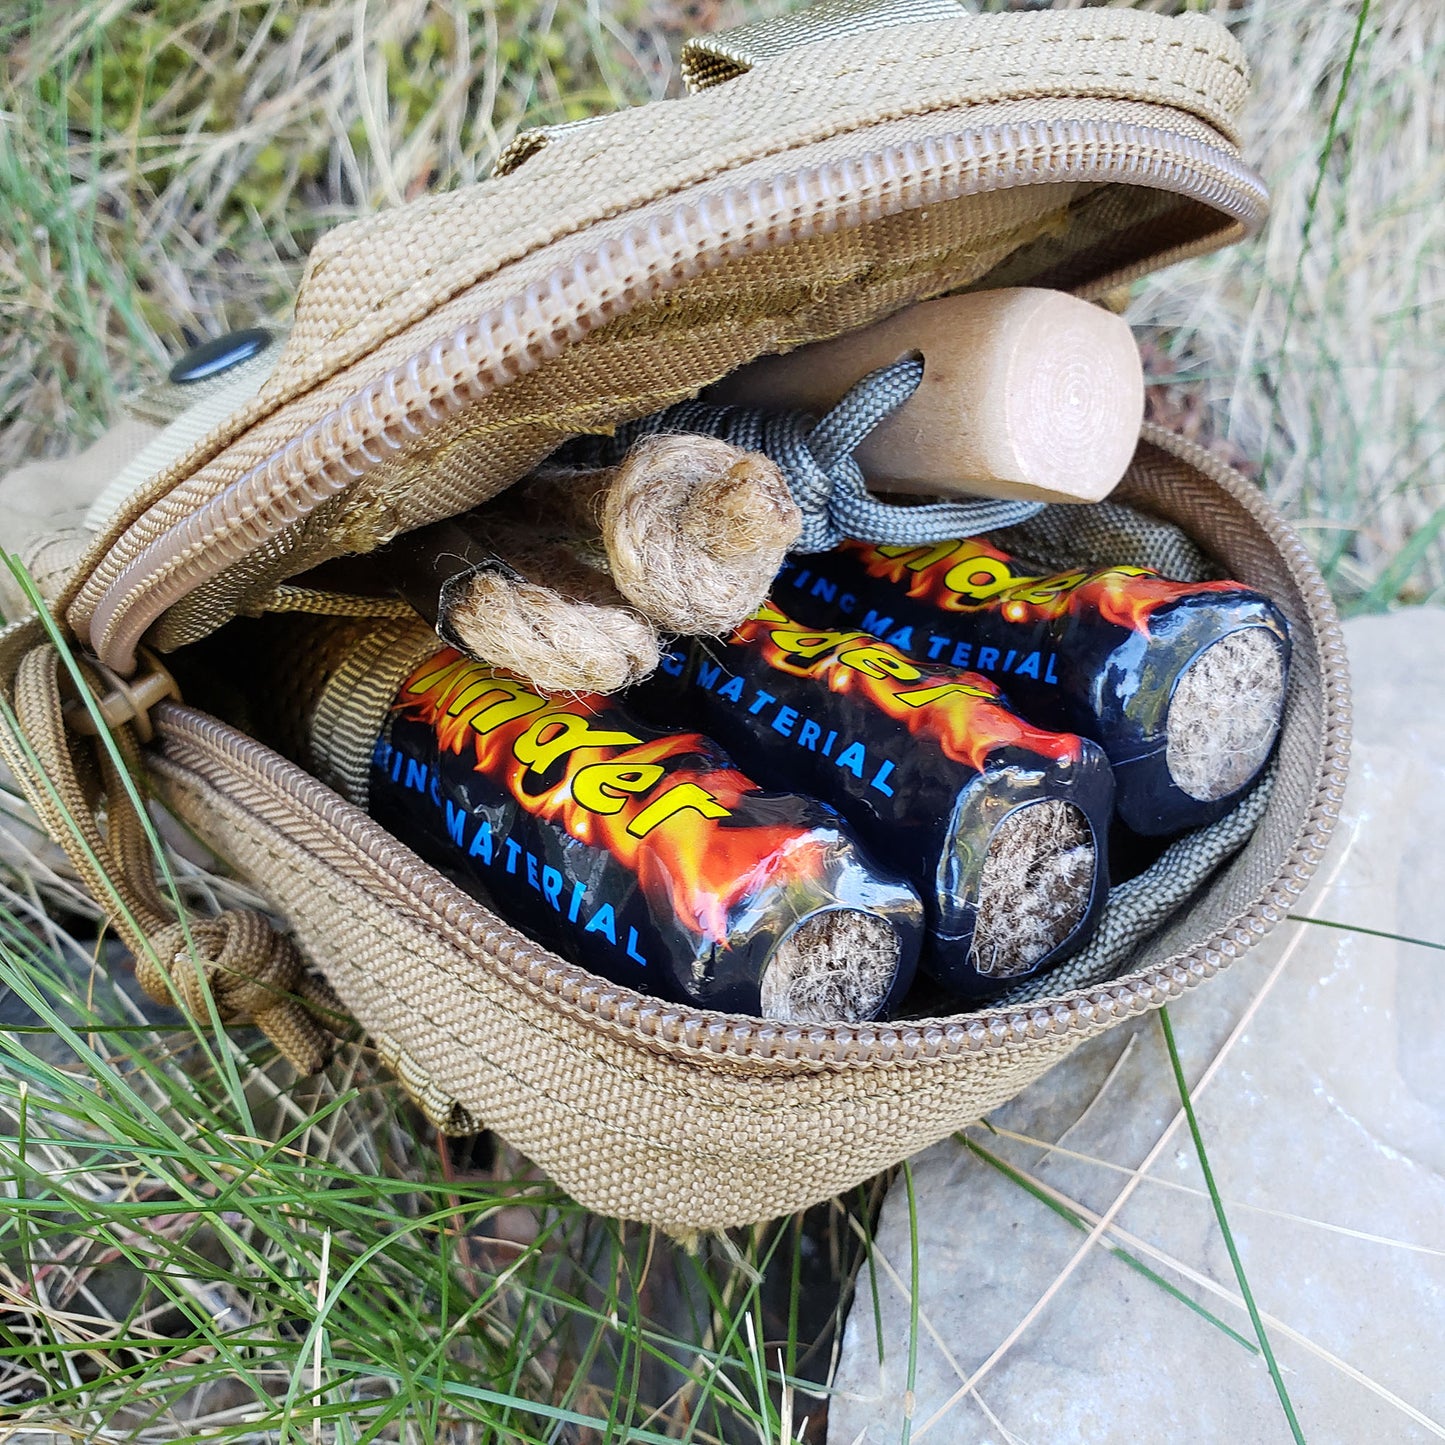 The complete firestarter package from Coiopers Bay all tuck neatly into the custom possibles bag.